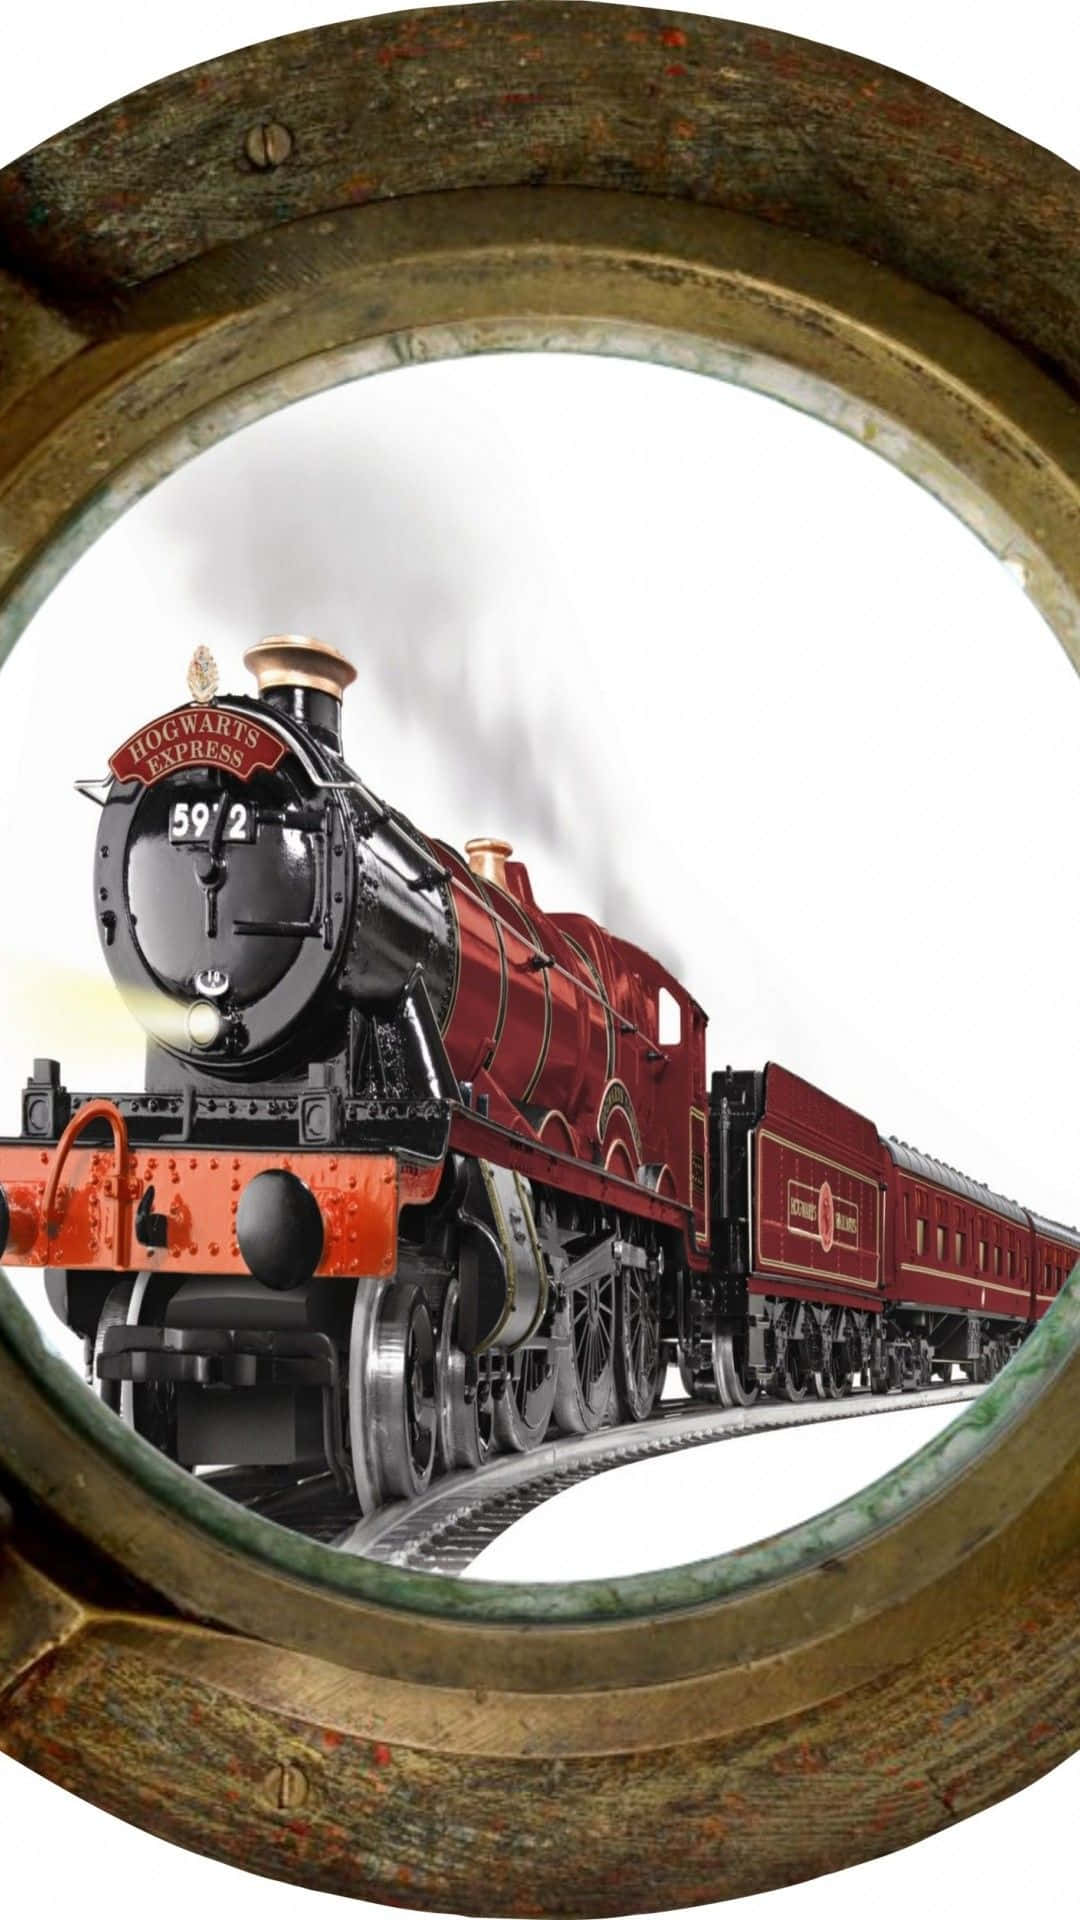 Hogwarts Express Steaming Through the Scenic Countryside Wallpaper